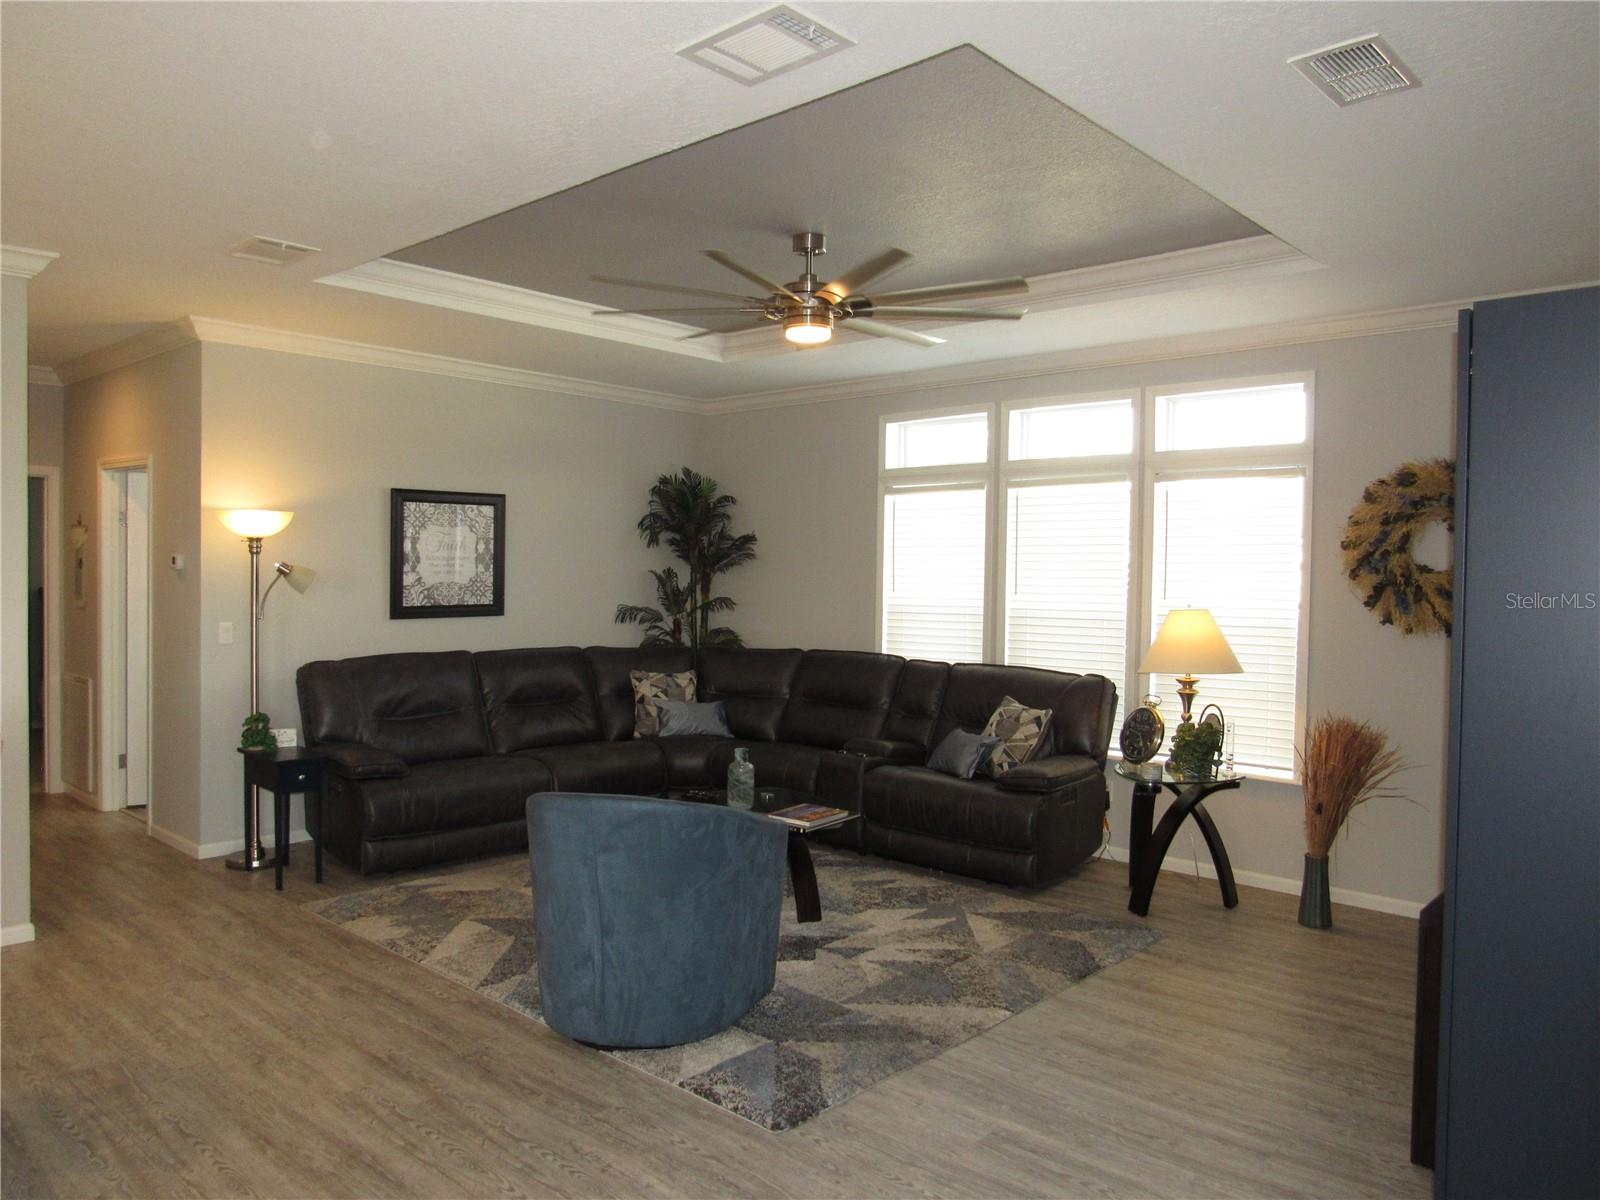 Living room with tray ceiling & 6' ceiling fan.